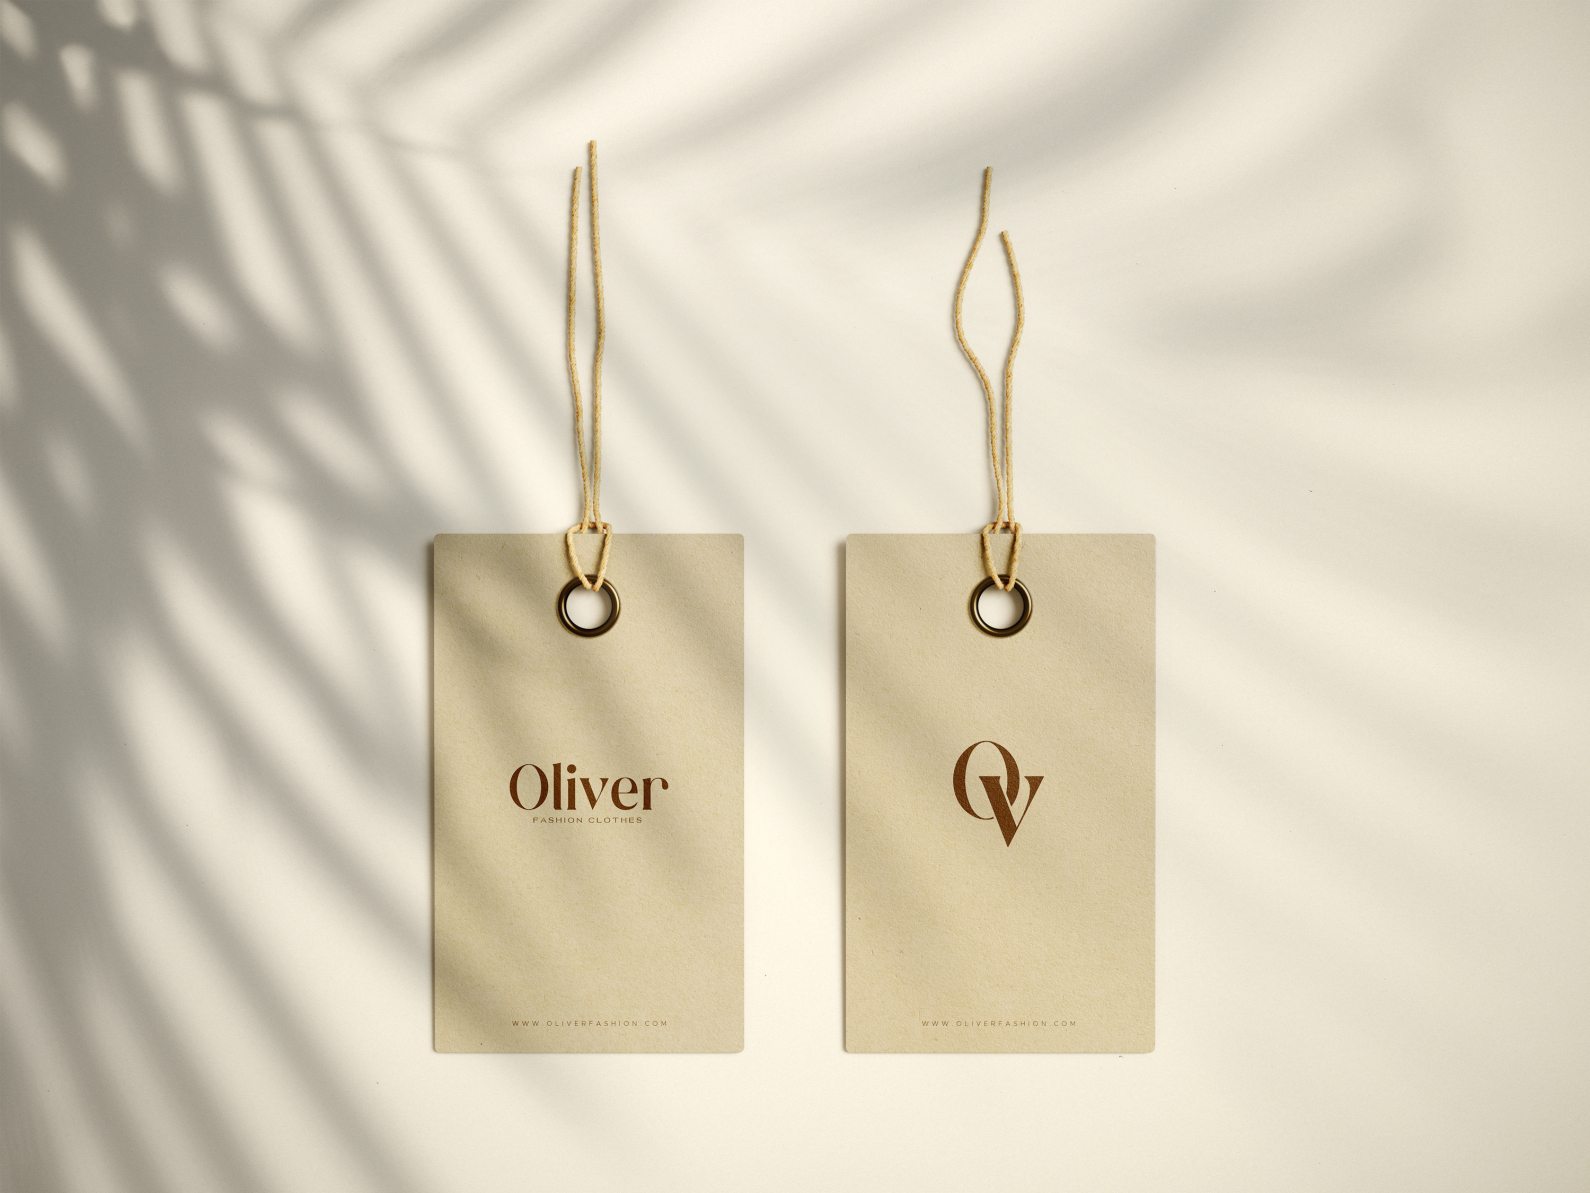 Oliver Brand Label Tag Design by Nadir Benalioua on Dribbble